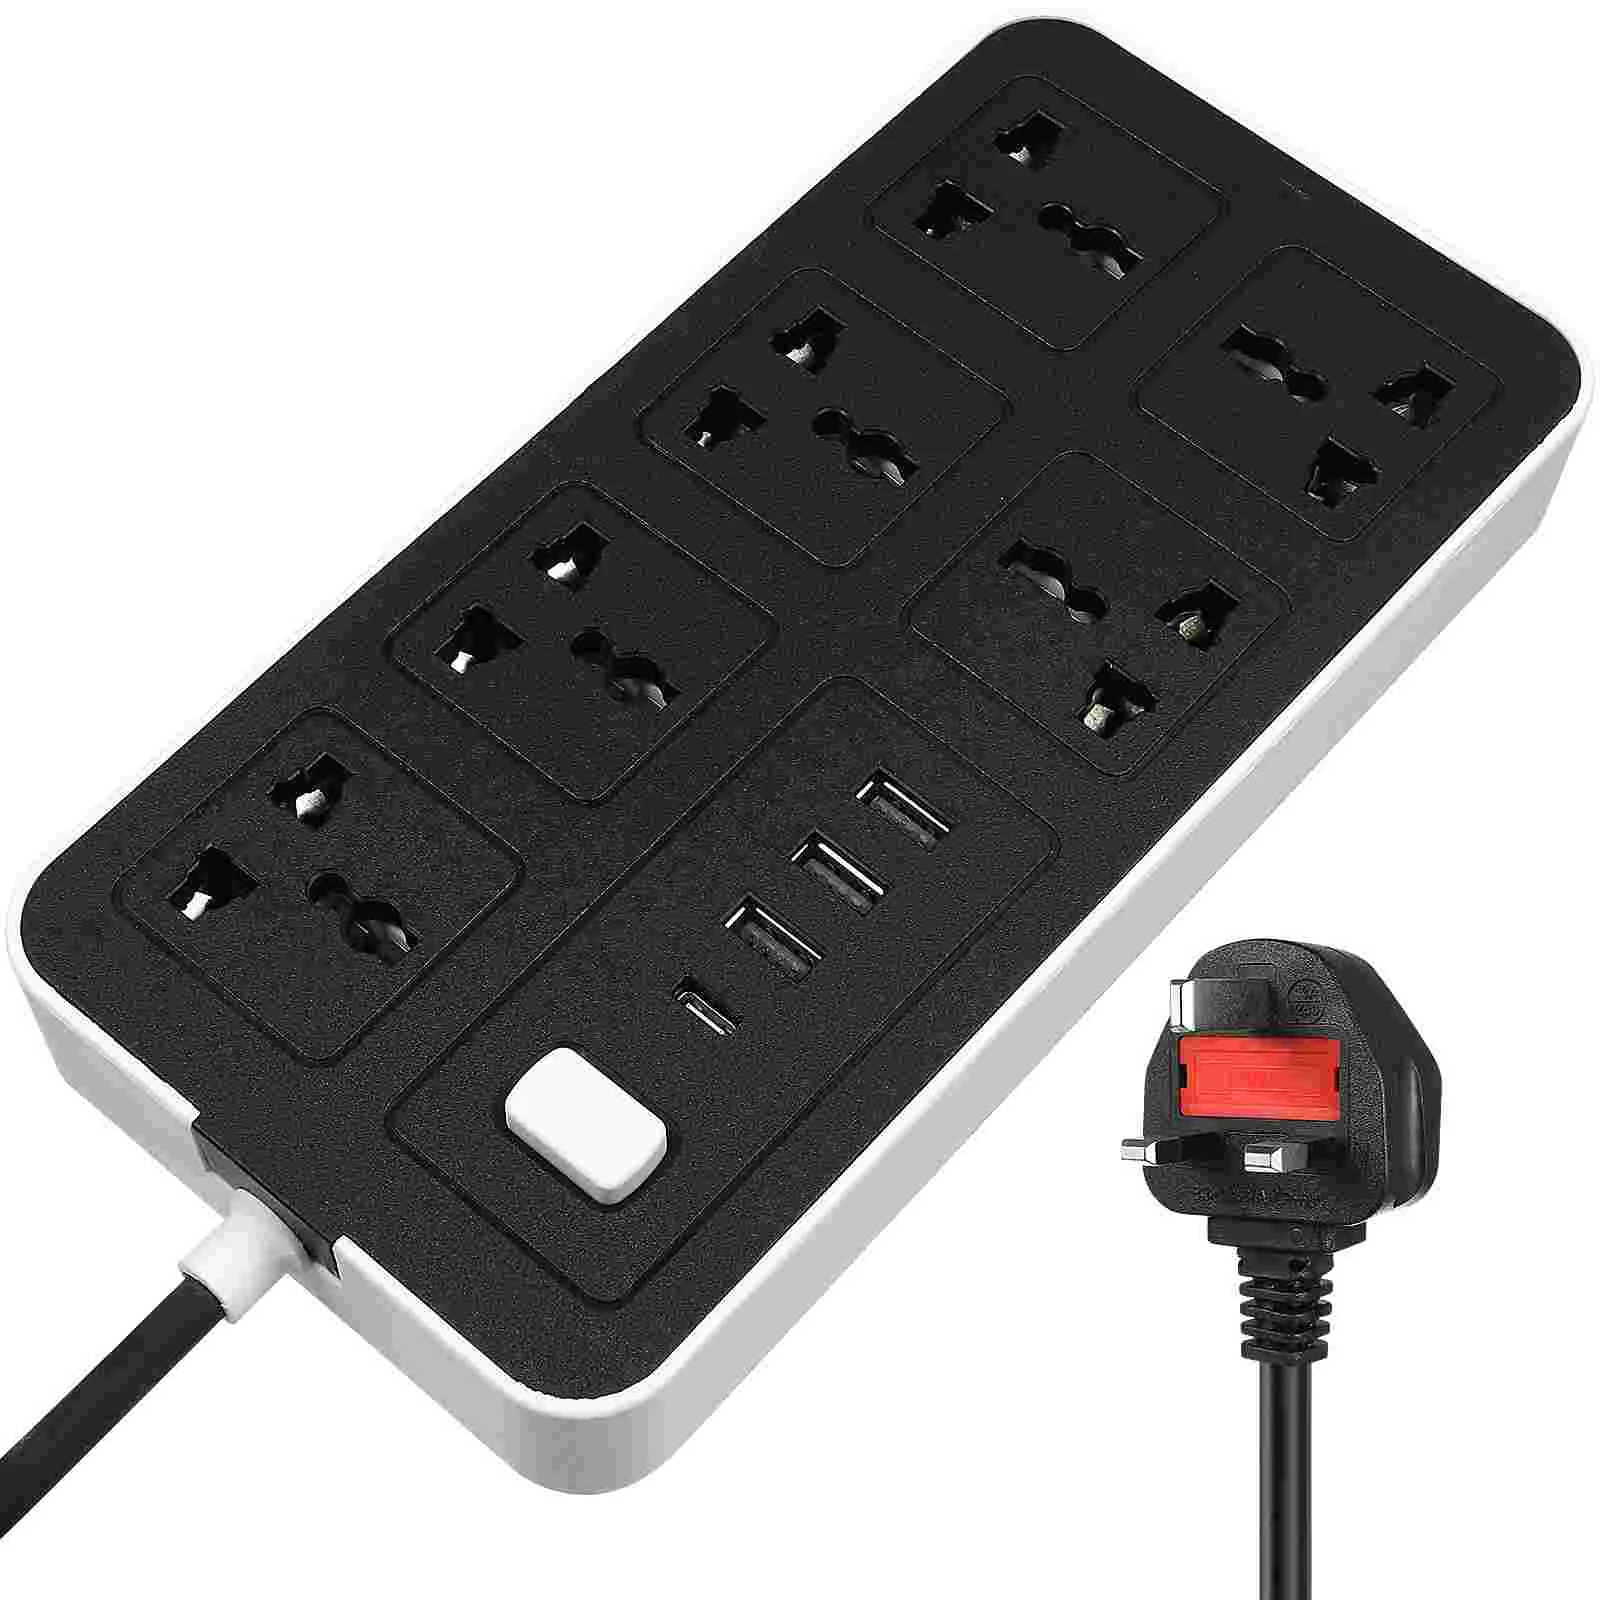 

Flat Power Strip Extension Cable Multi Plug Outlet With USB Charging Ports UK Plug British Standard Panel Wiring Socket